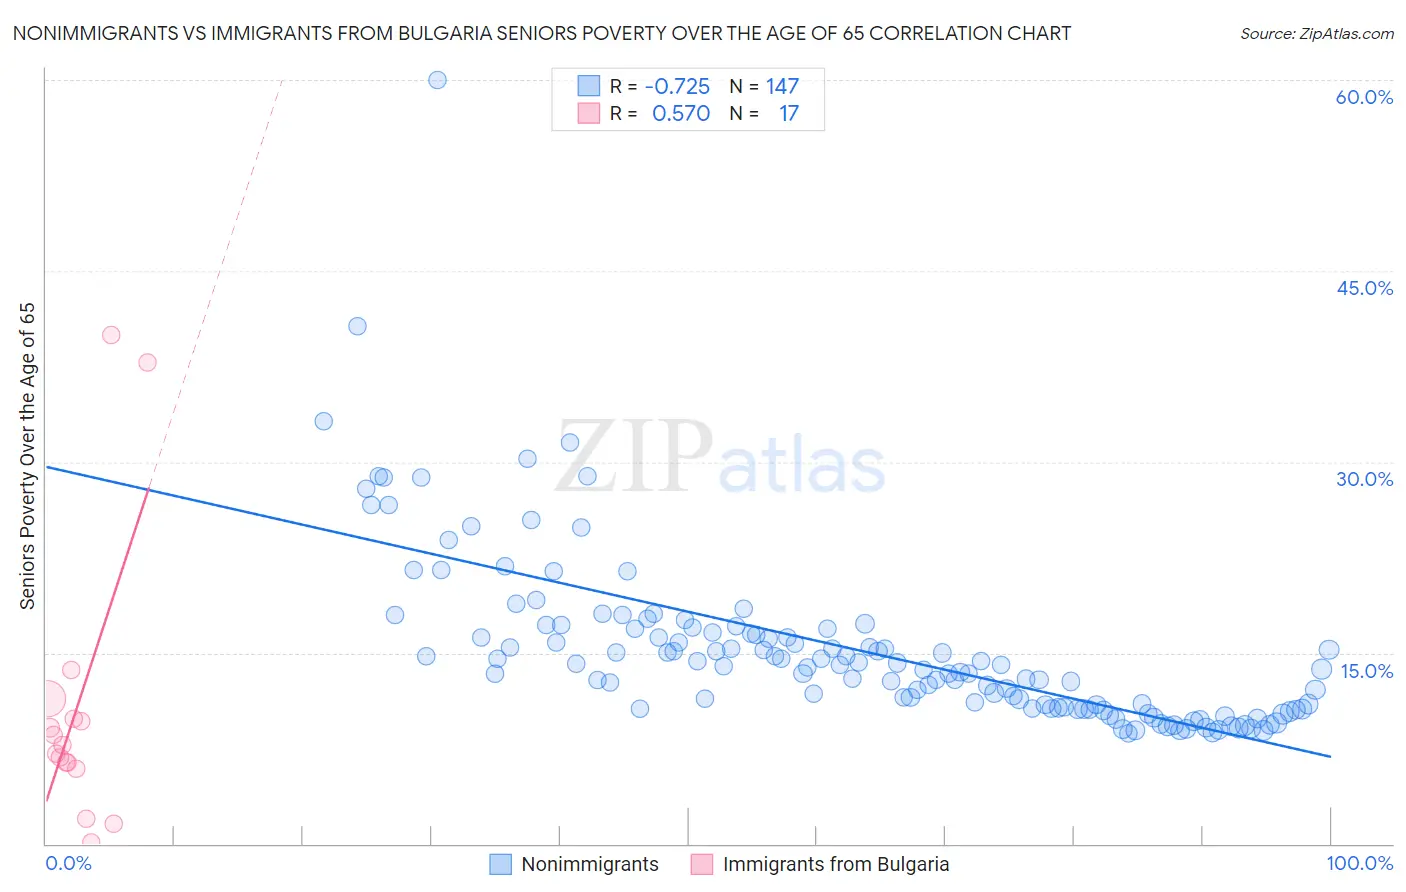 Nonimmigrants vs Immigrants from Bulgaria Seniors Poverty Over the Age of 65